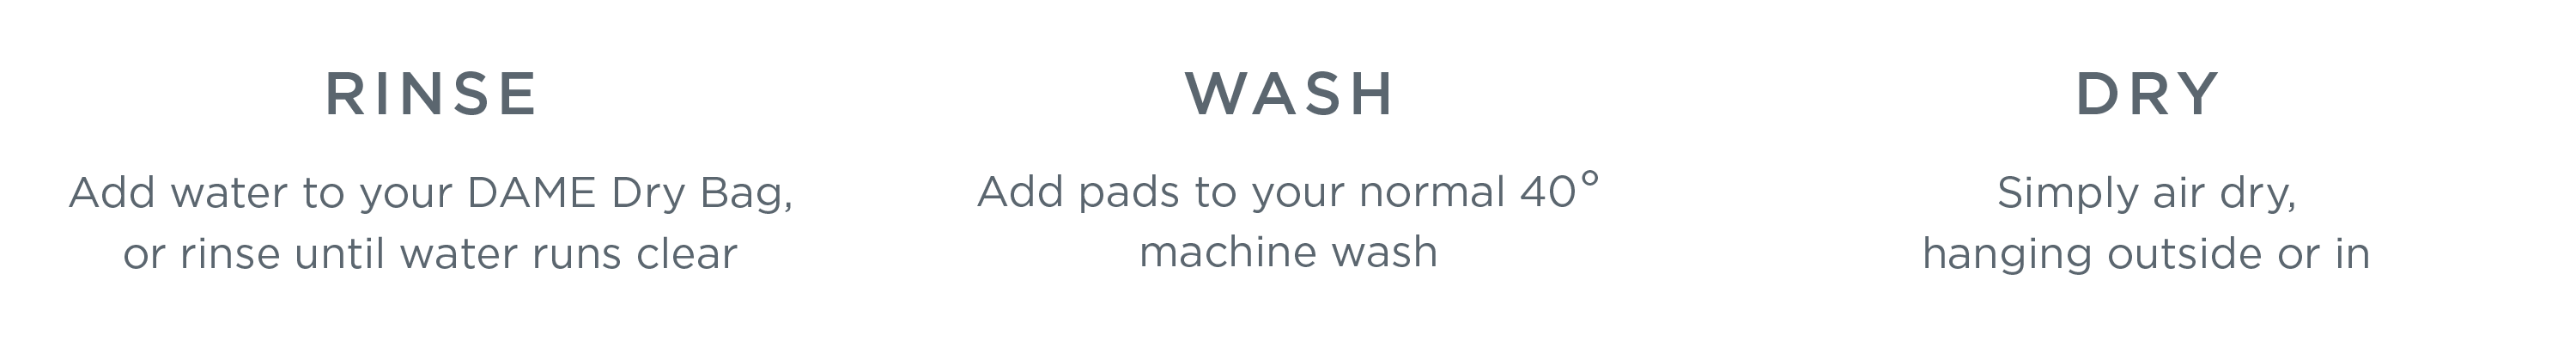 WASHING YOUR PADS